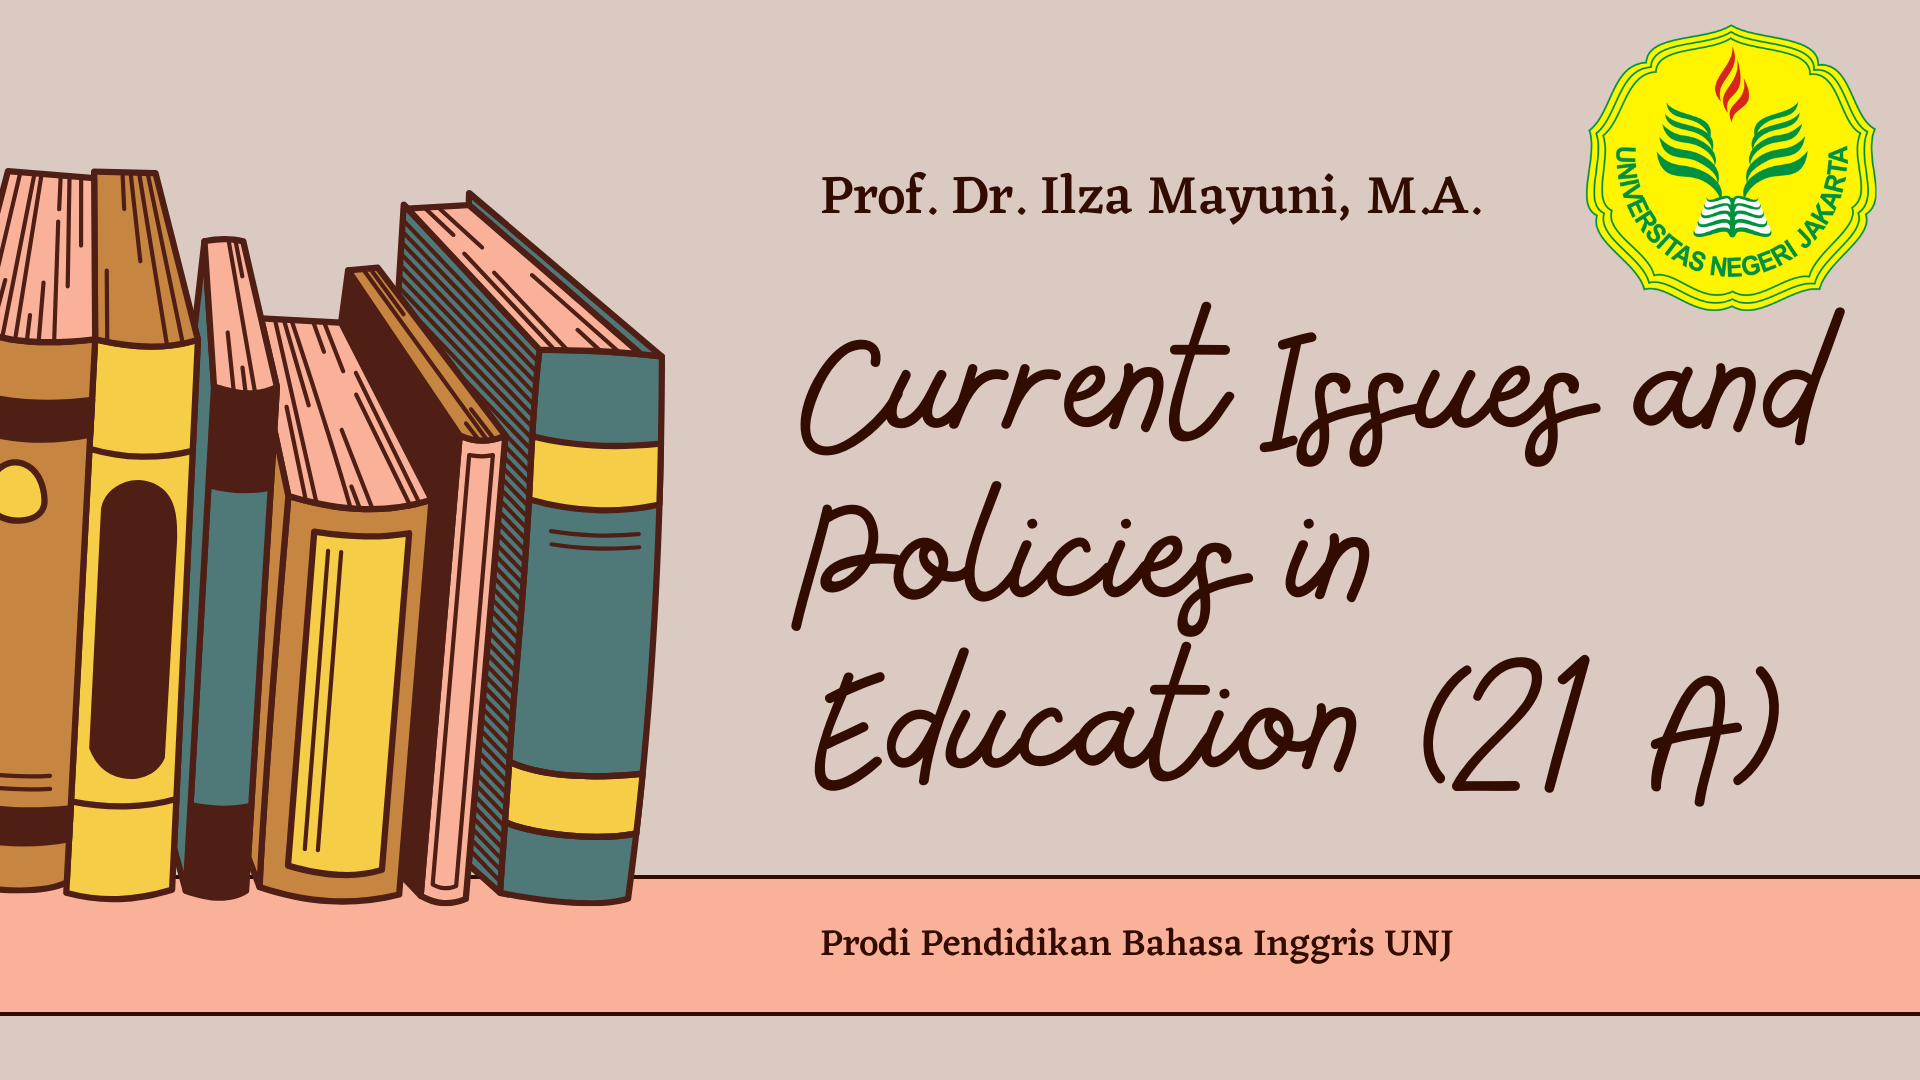 Current Issues and Policies in Education (120-21 A)